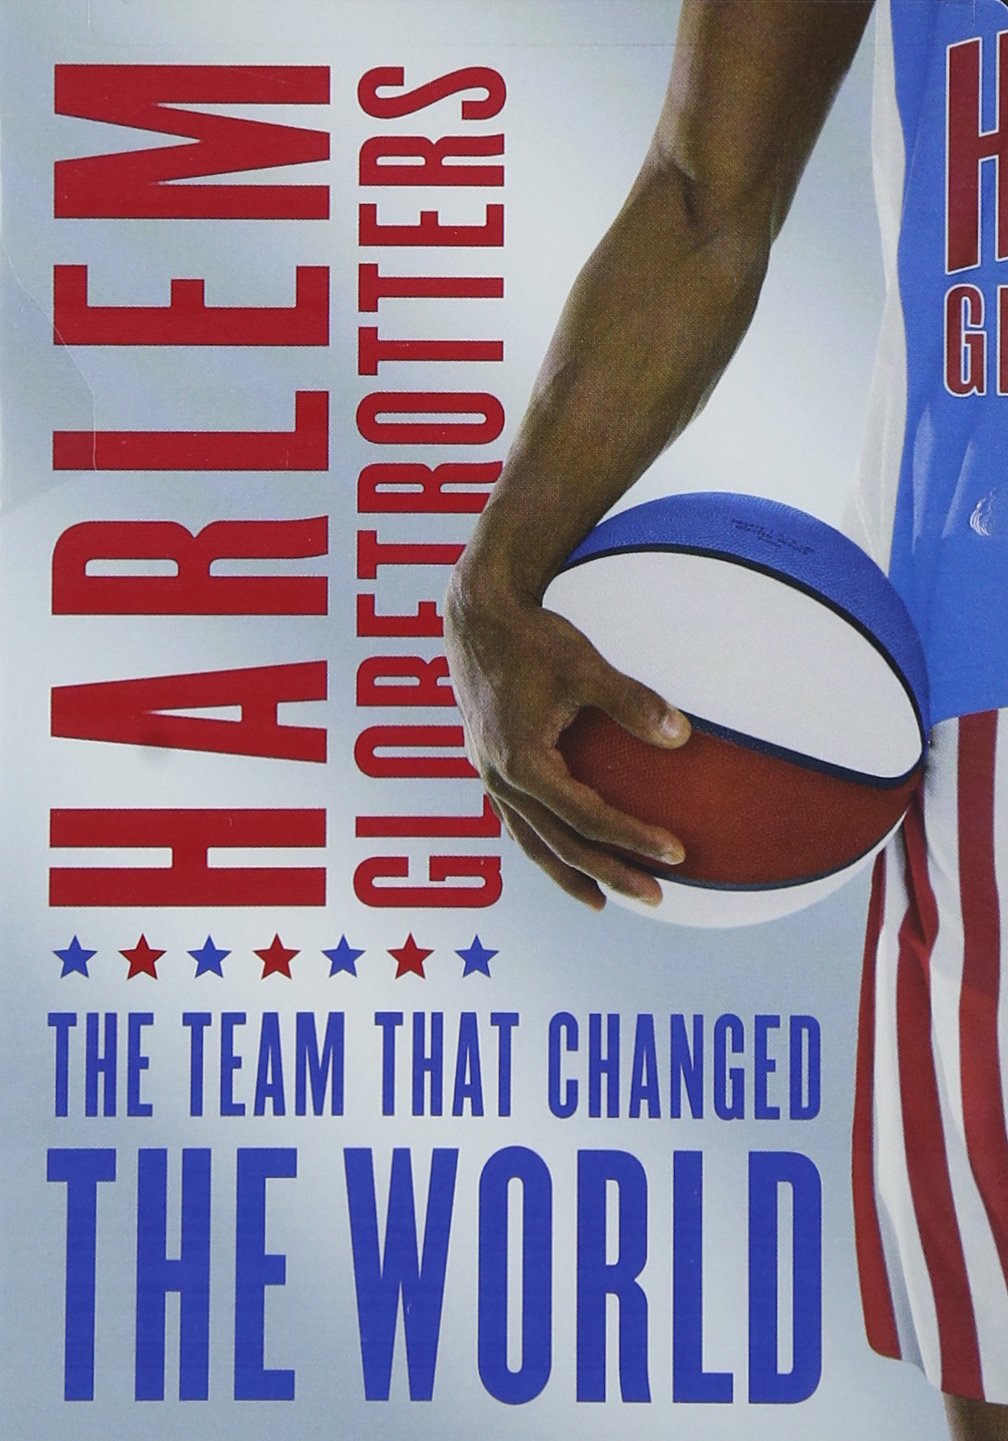 The Harlem Globetrotters: The Team That Changed the World (2005) Screenshot 2